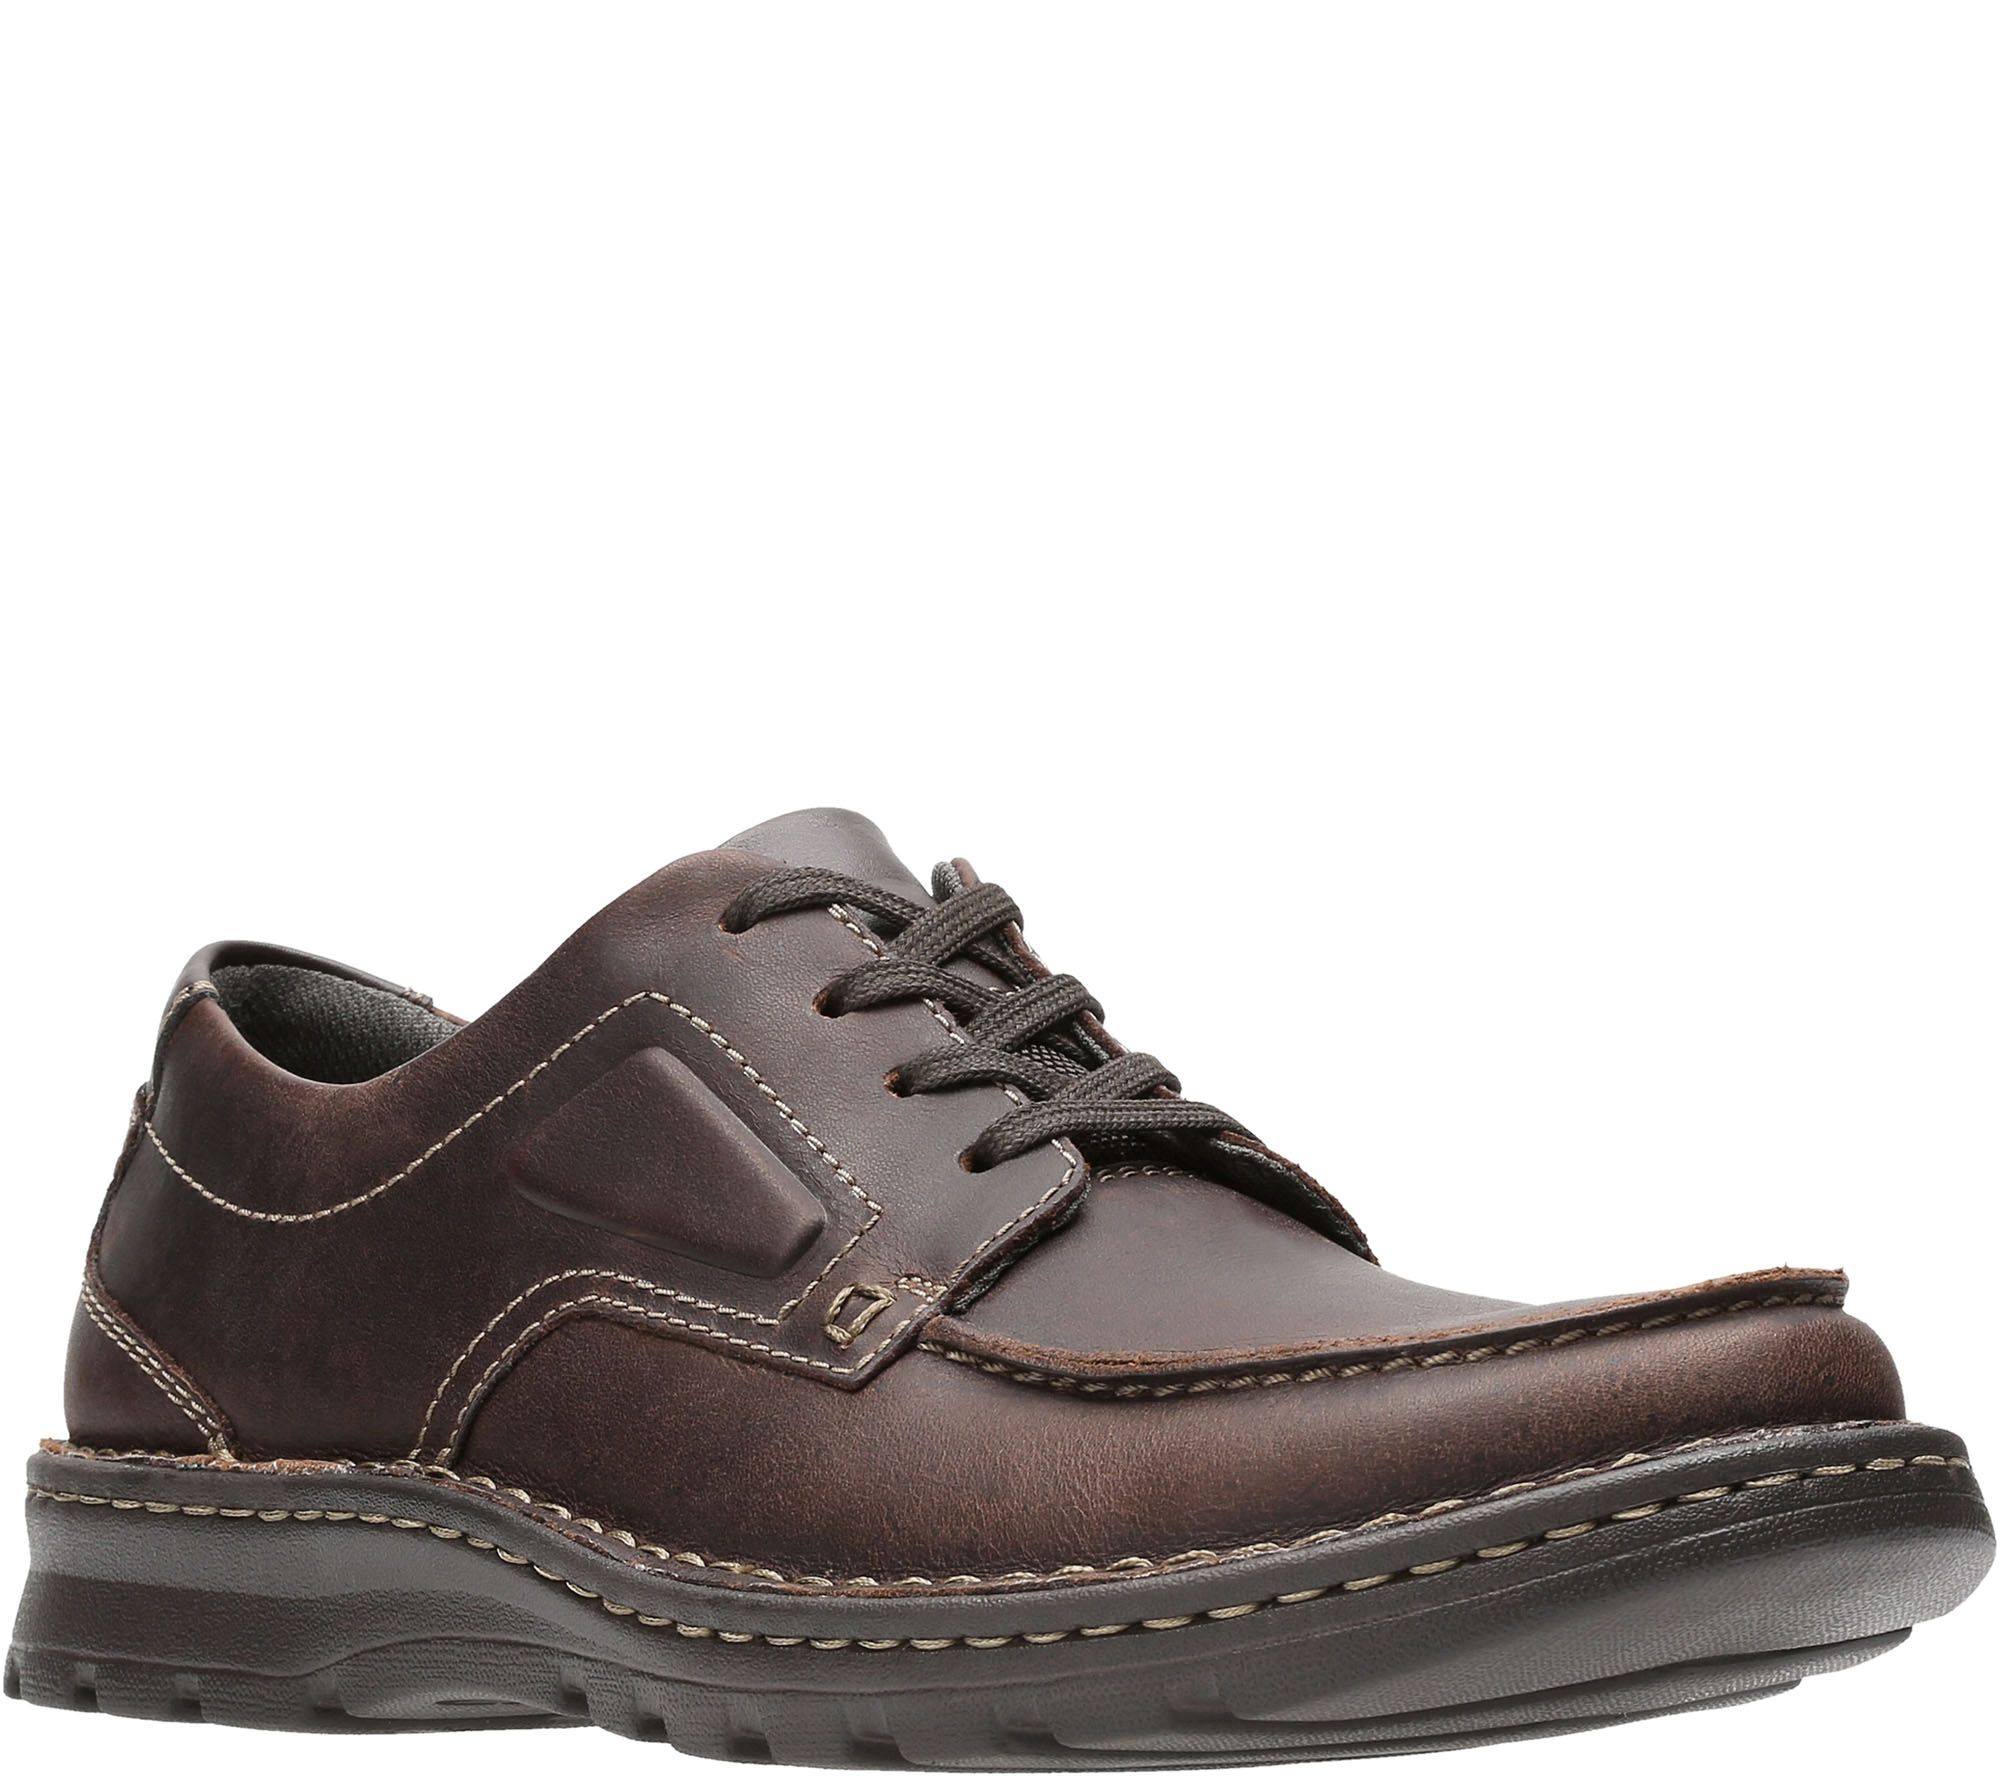 clarks oxford mens shoes